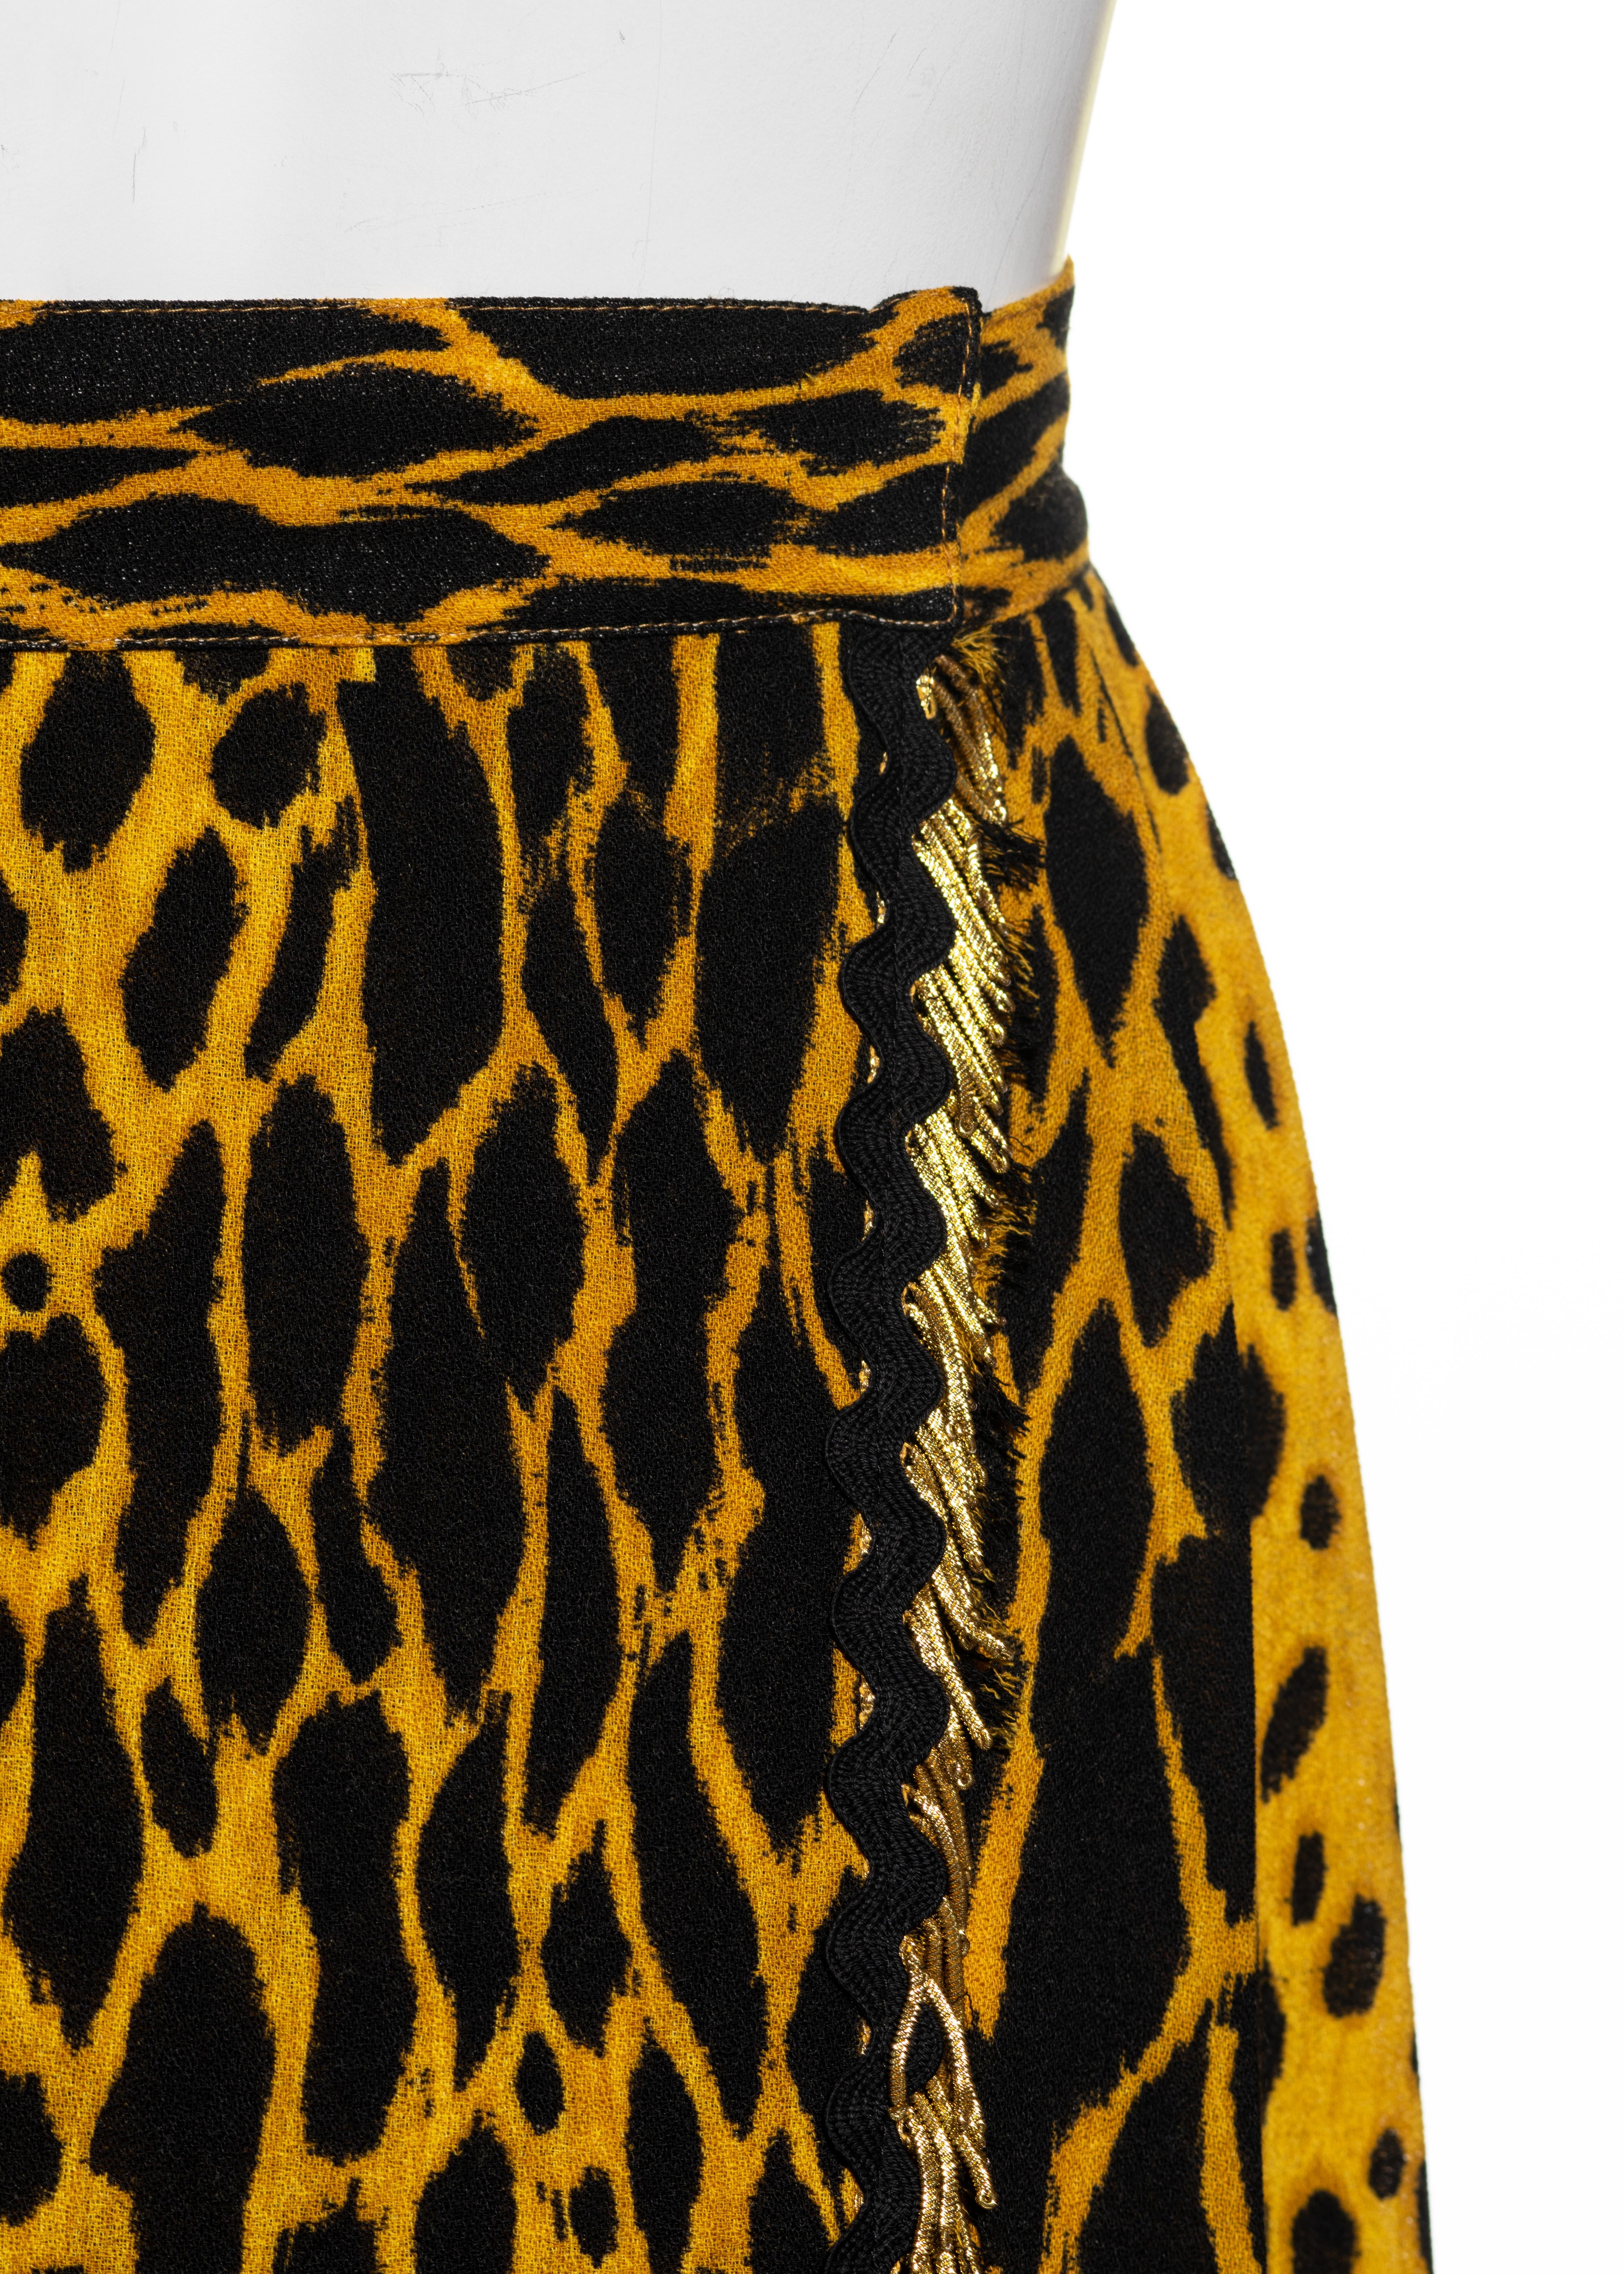 Gianni Versace yellow cheetah print wool crepe pleated wrap skirt, ss 1992 In Excellent Condition For Sale In London, GB